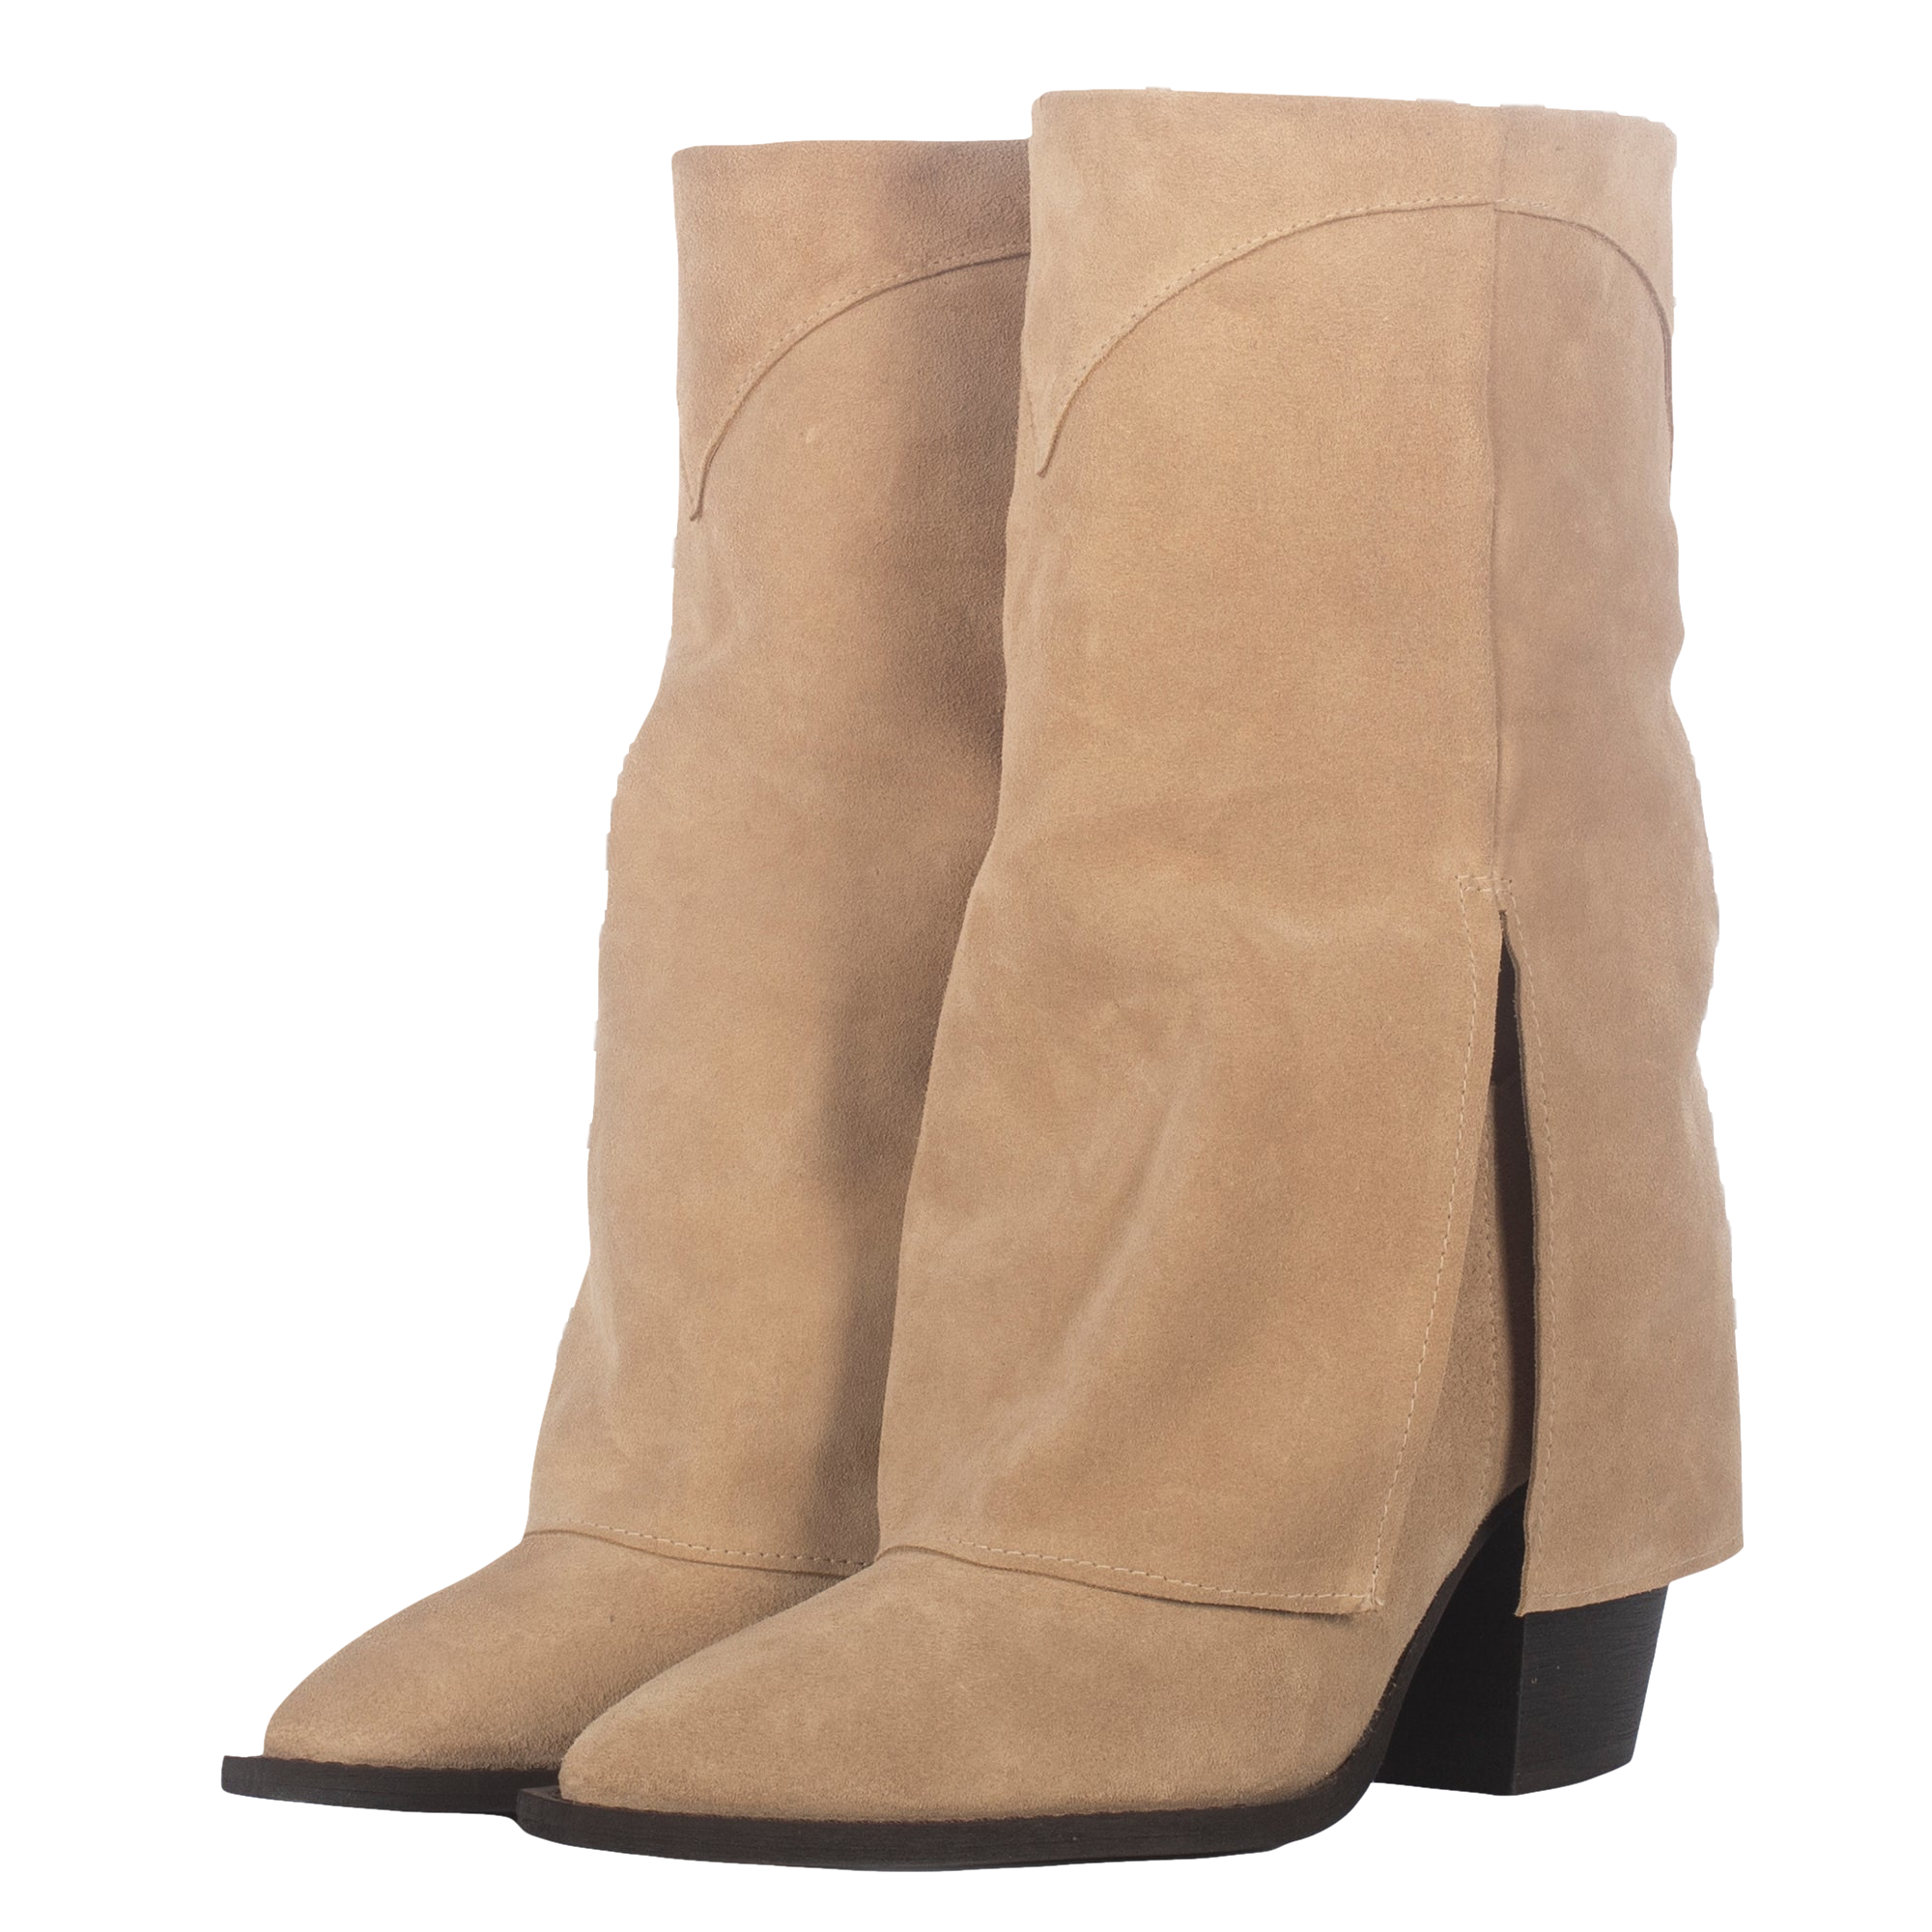 Toral Vegas Sand Suede Boots In Beige